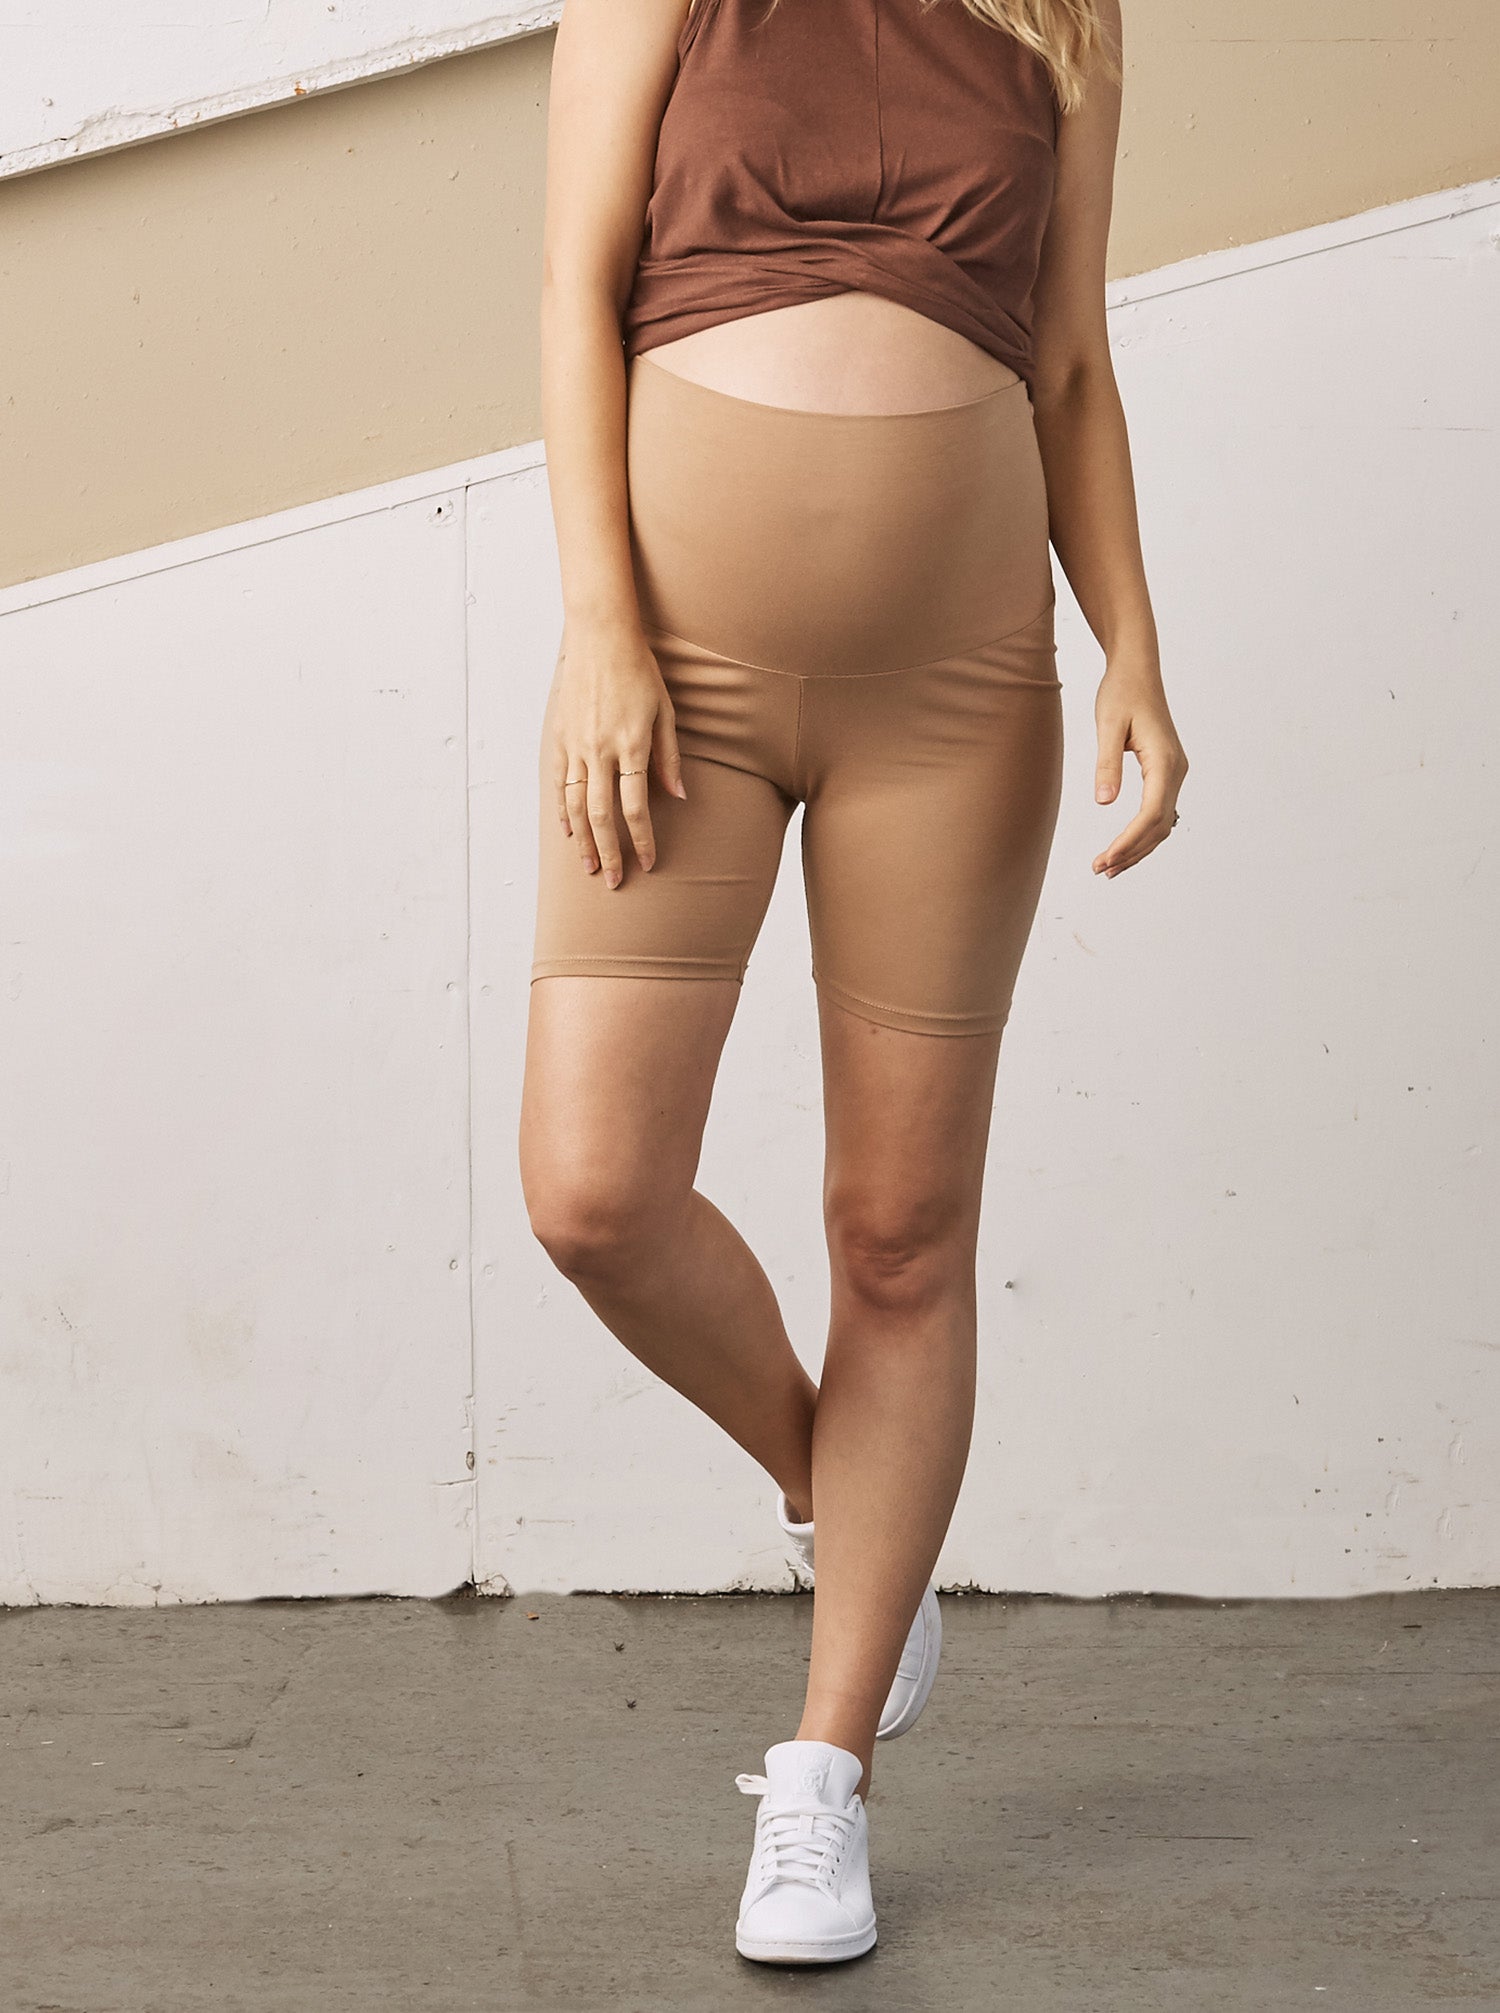 Main view - A pregnant Woman in Maternity Cotton Bike Shorts in Nude Colour from Angel Maternity  (6699007901799)